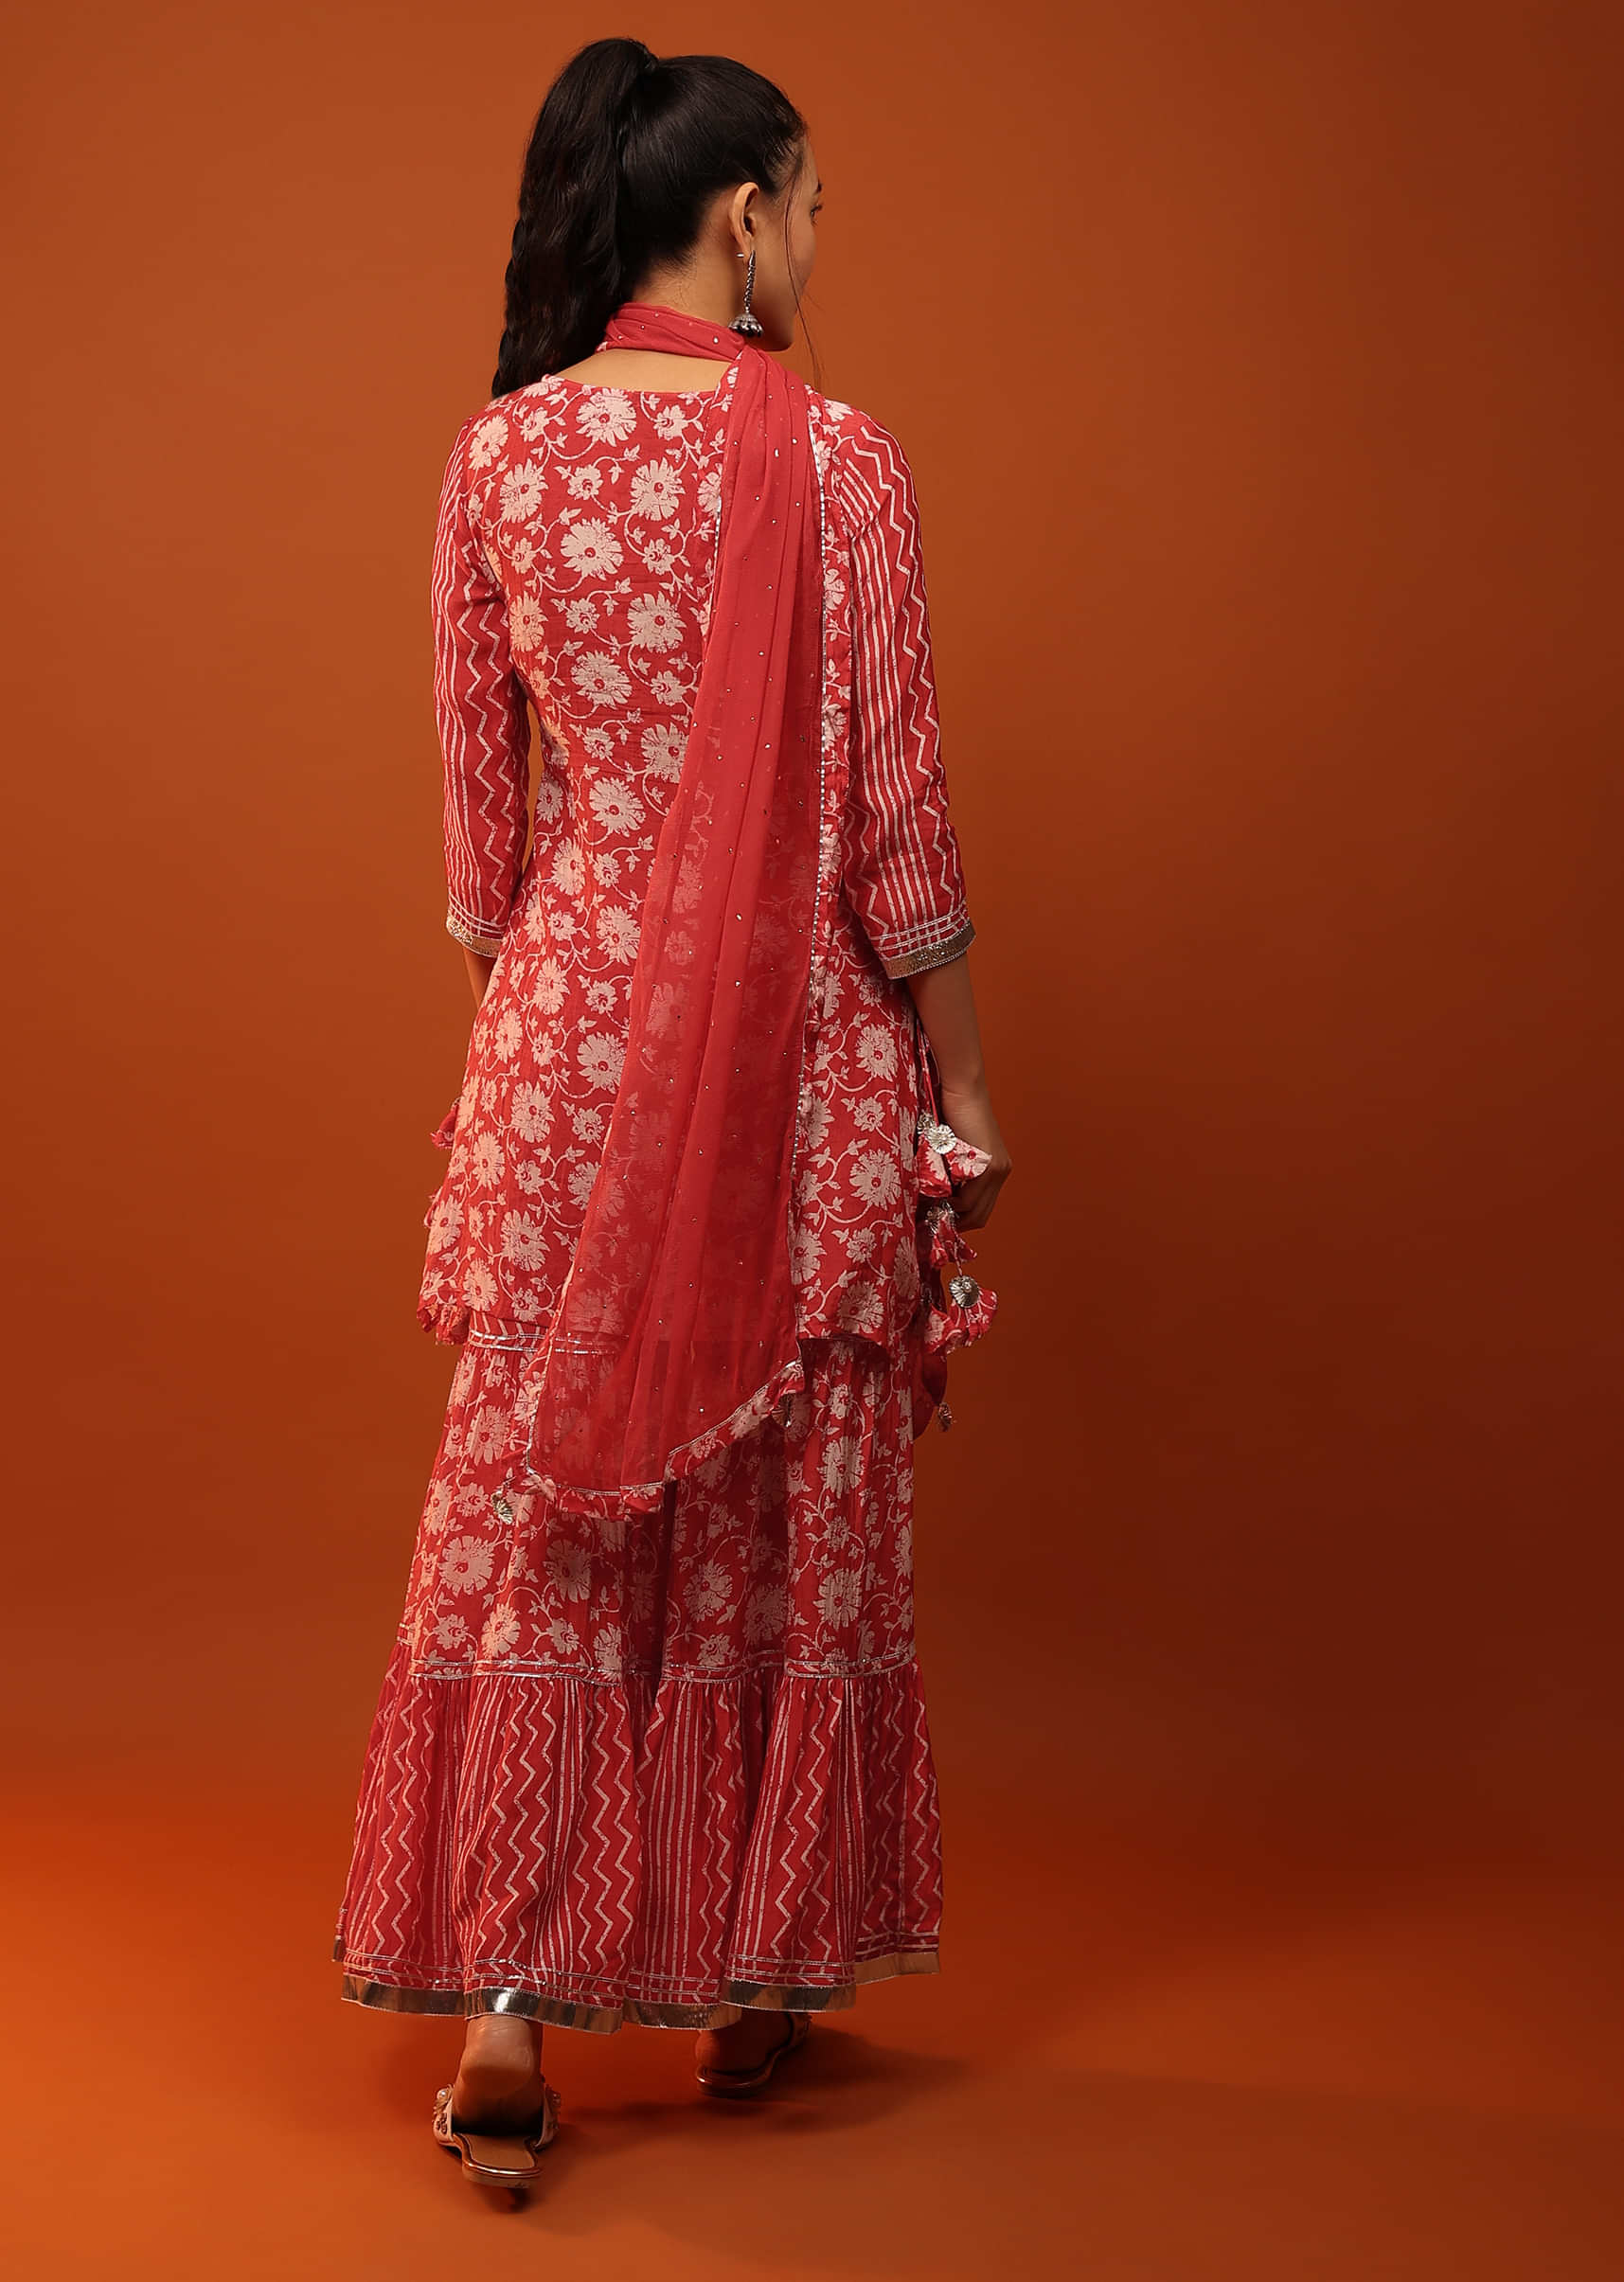 Red Sharara Suit With Floral Prints, Gotta Patti Work And Sequins